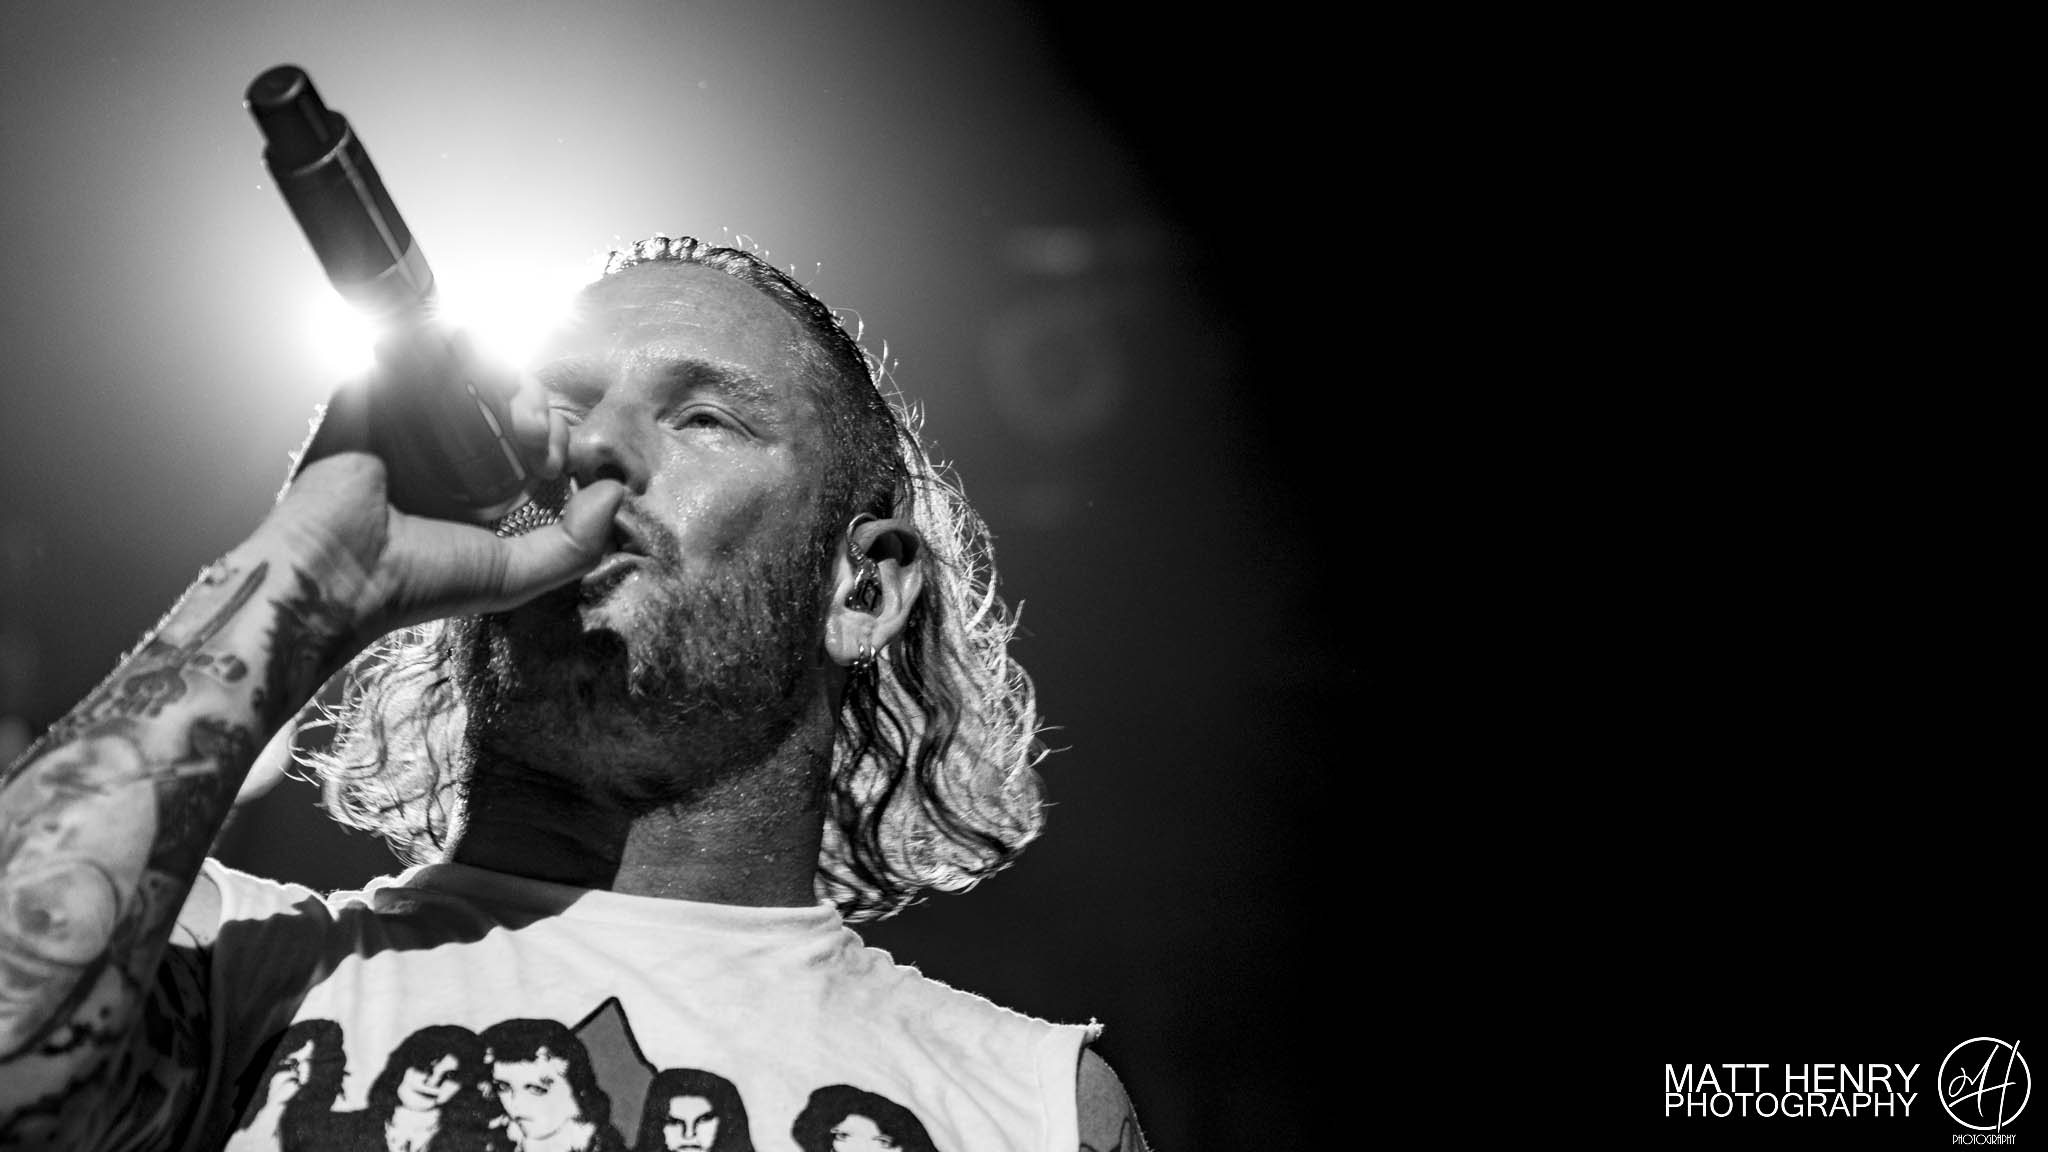 Concert Review - Stone Sour, Auckland New Zealand, 2017